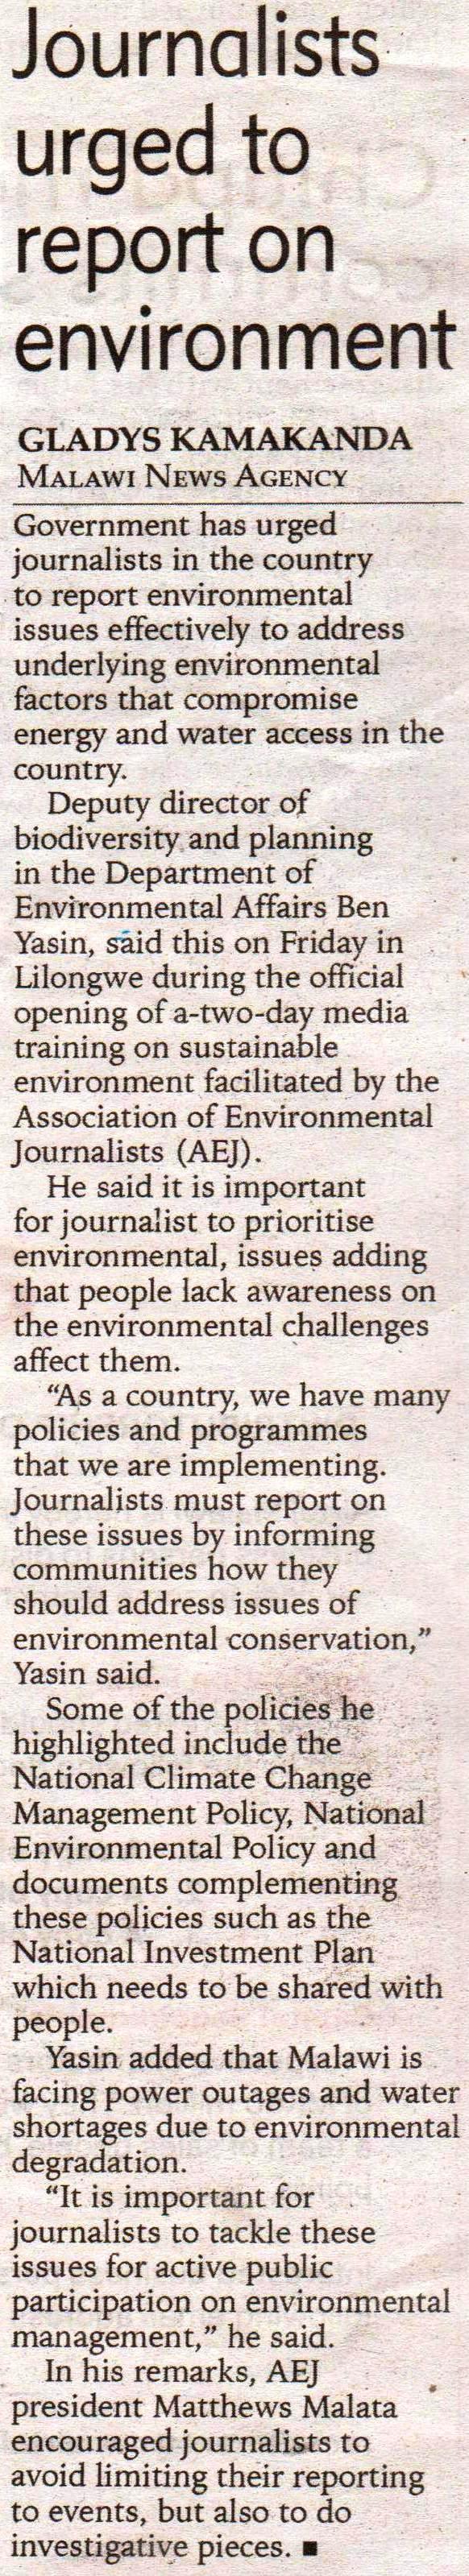 Journalists urged to report on environment_Malawi News Agency.JPG